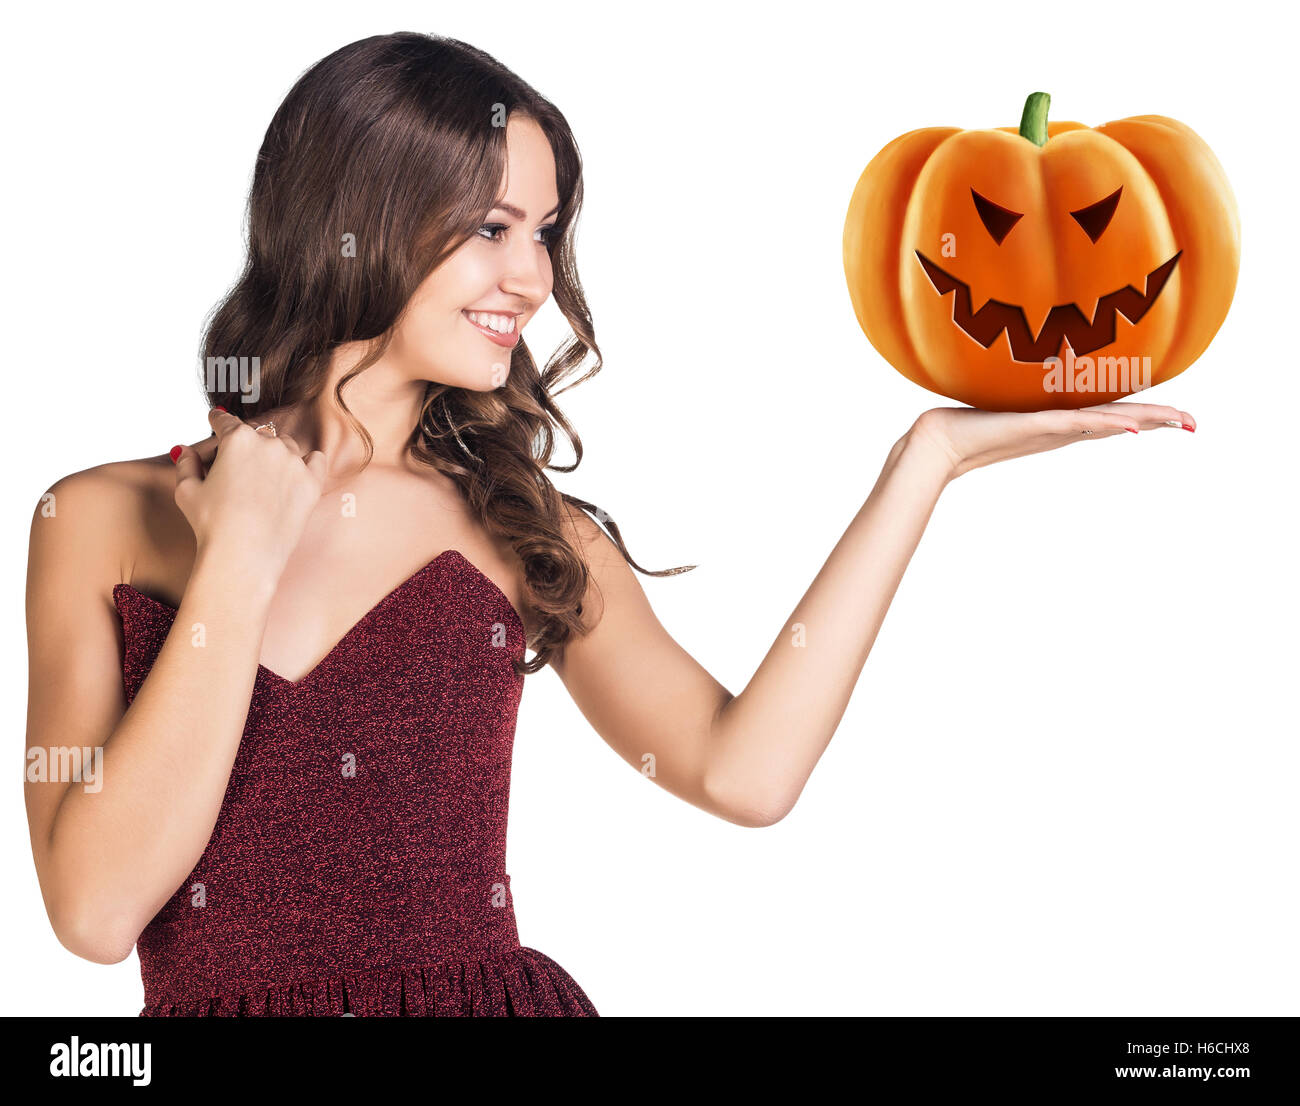 Young woman holding carved pumpkin. Stock Photo